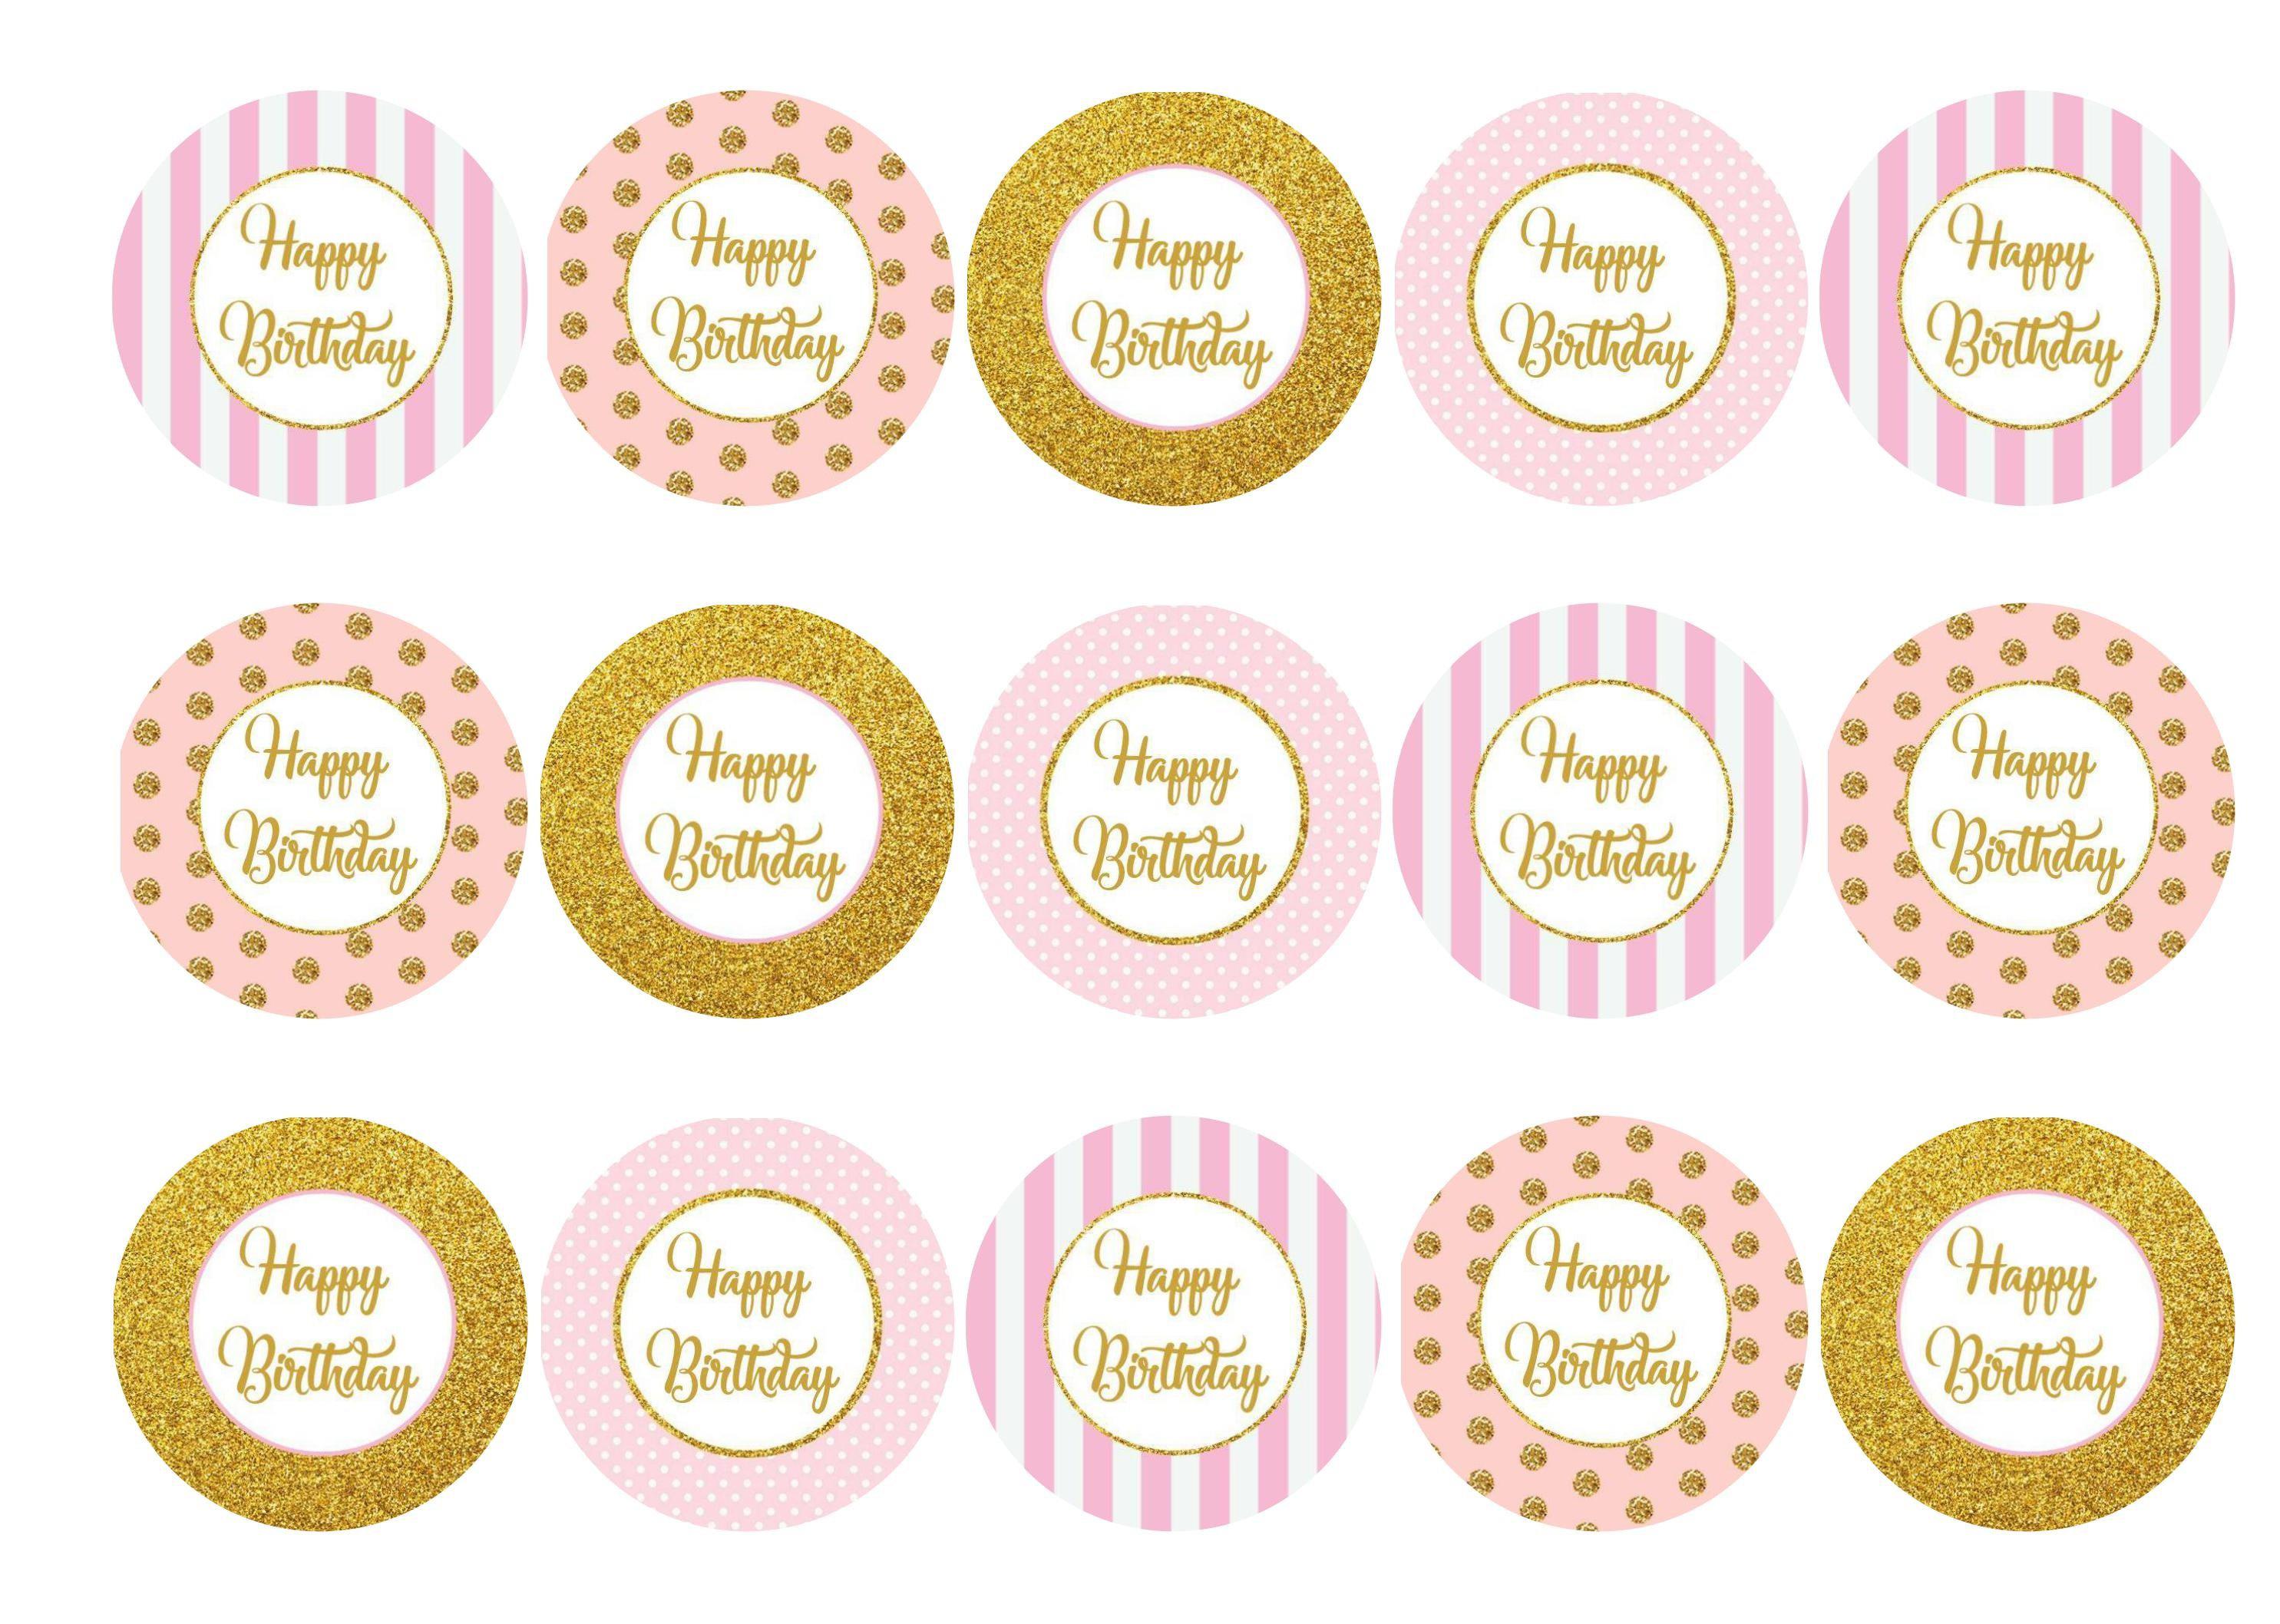 Edible pink and gold Happy Birthday cupcake toppers